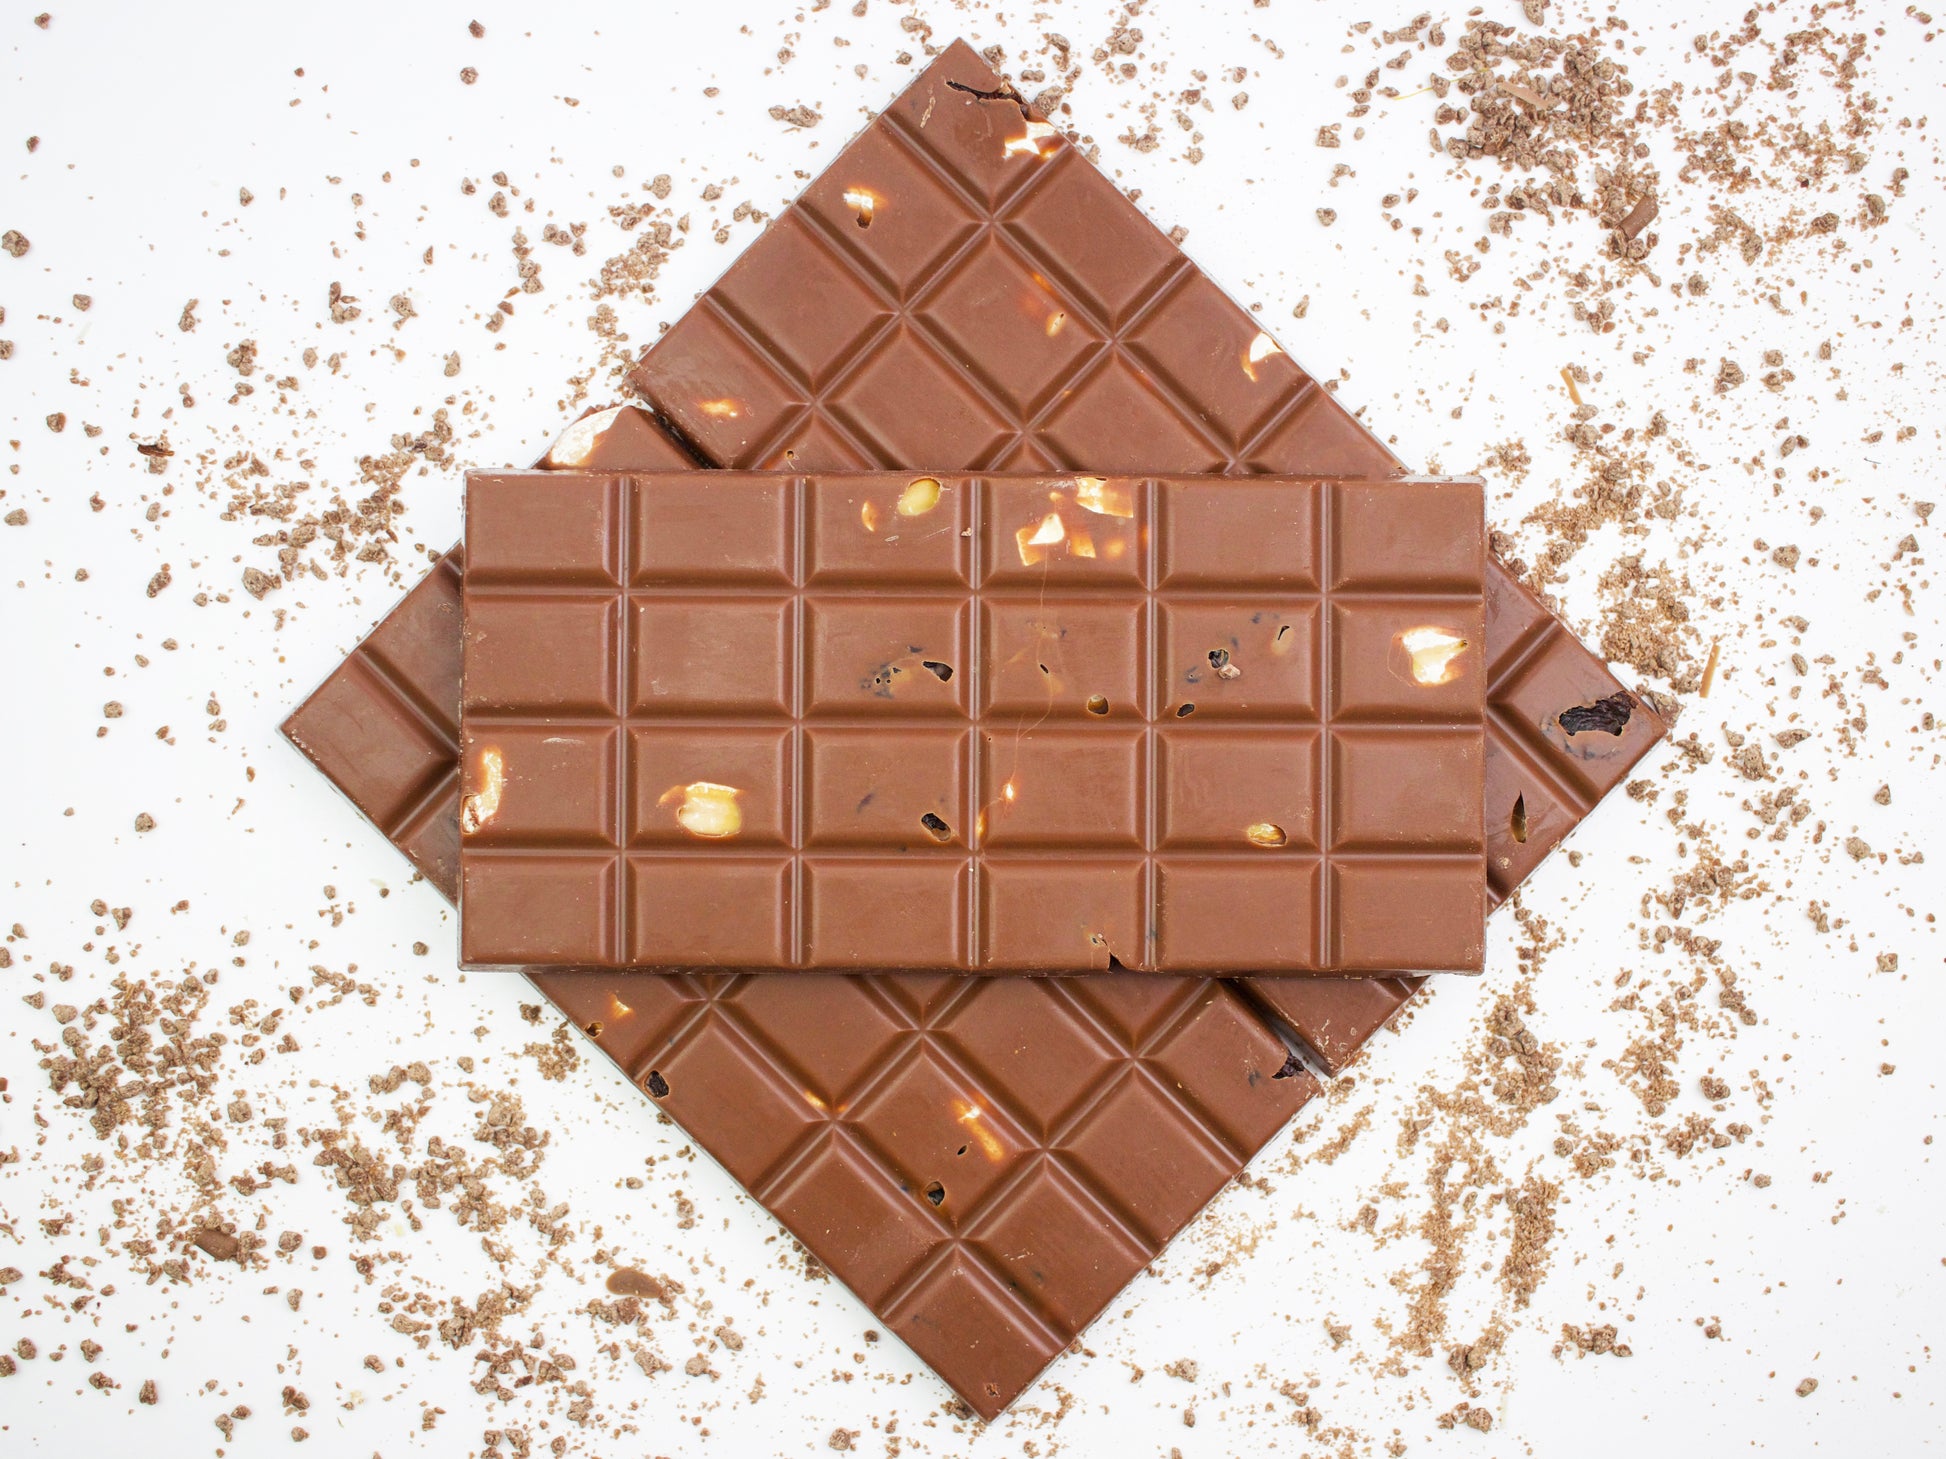 image shows 3, 100g hand made milk chocolate bars embedded with peanuts and raisins